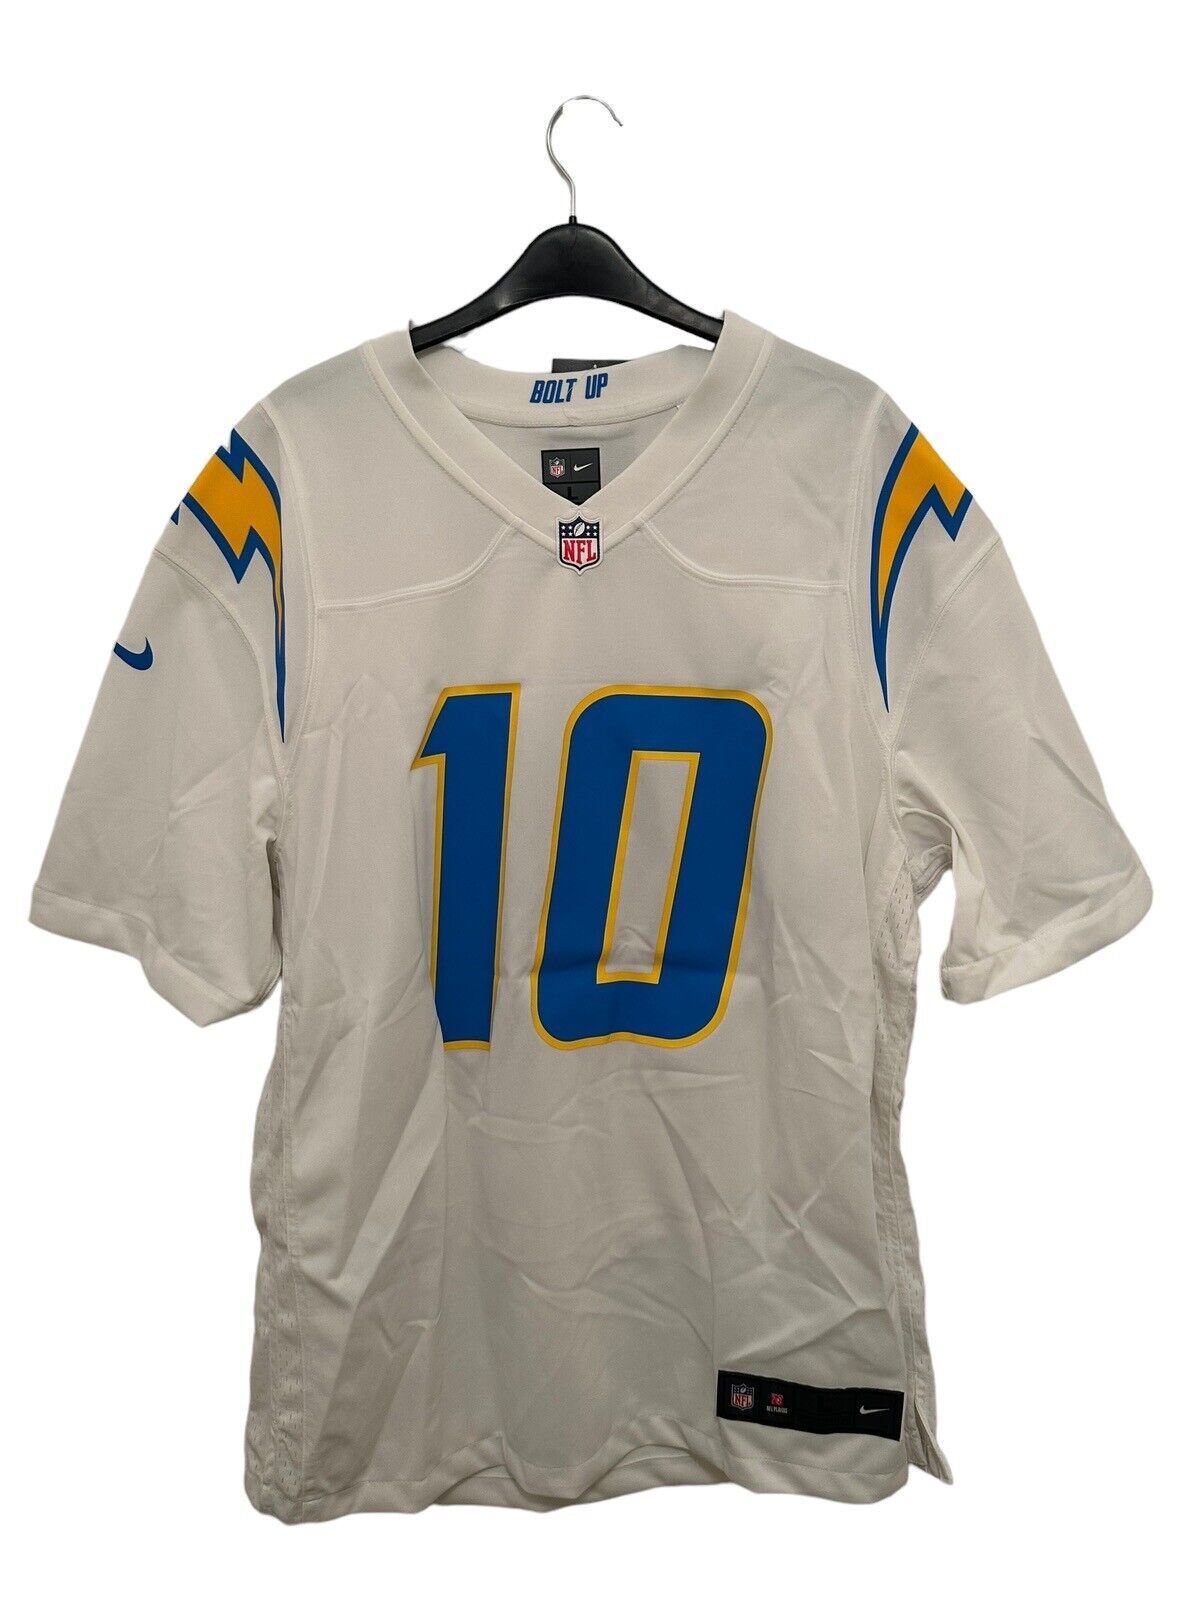 Nike NFL Los Angeles Chargers Game Jersey - HERBERT 10 - Men’s Size Large